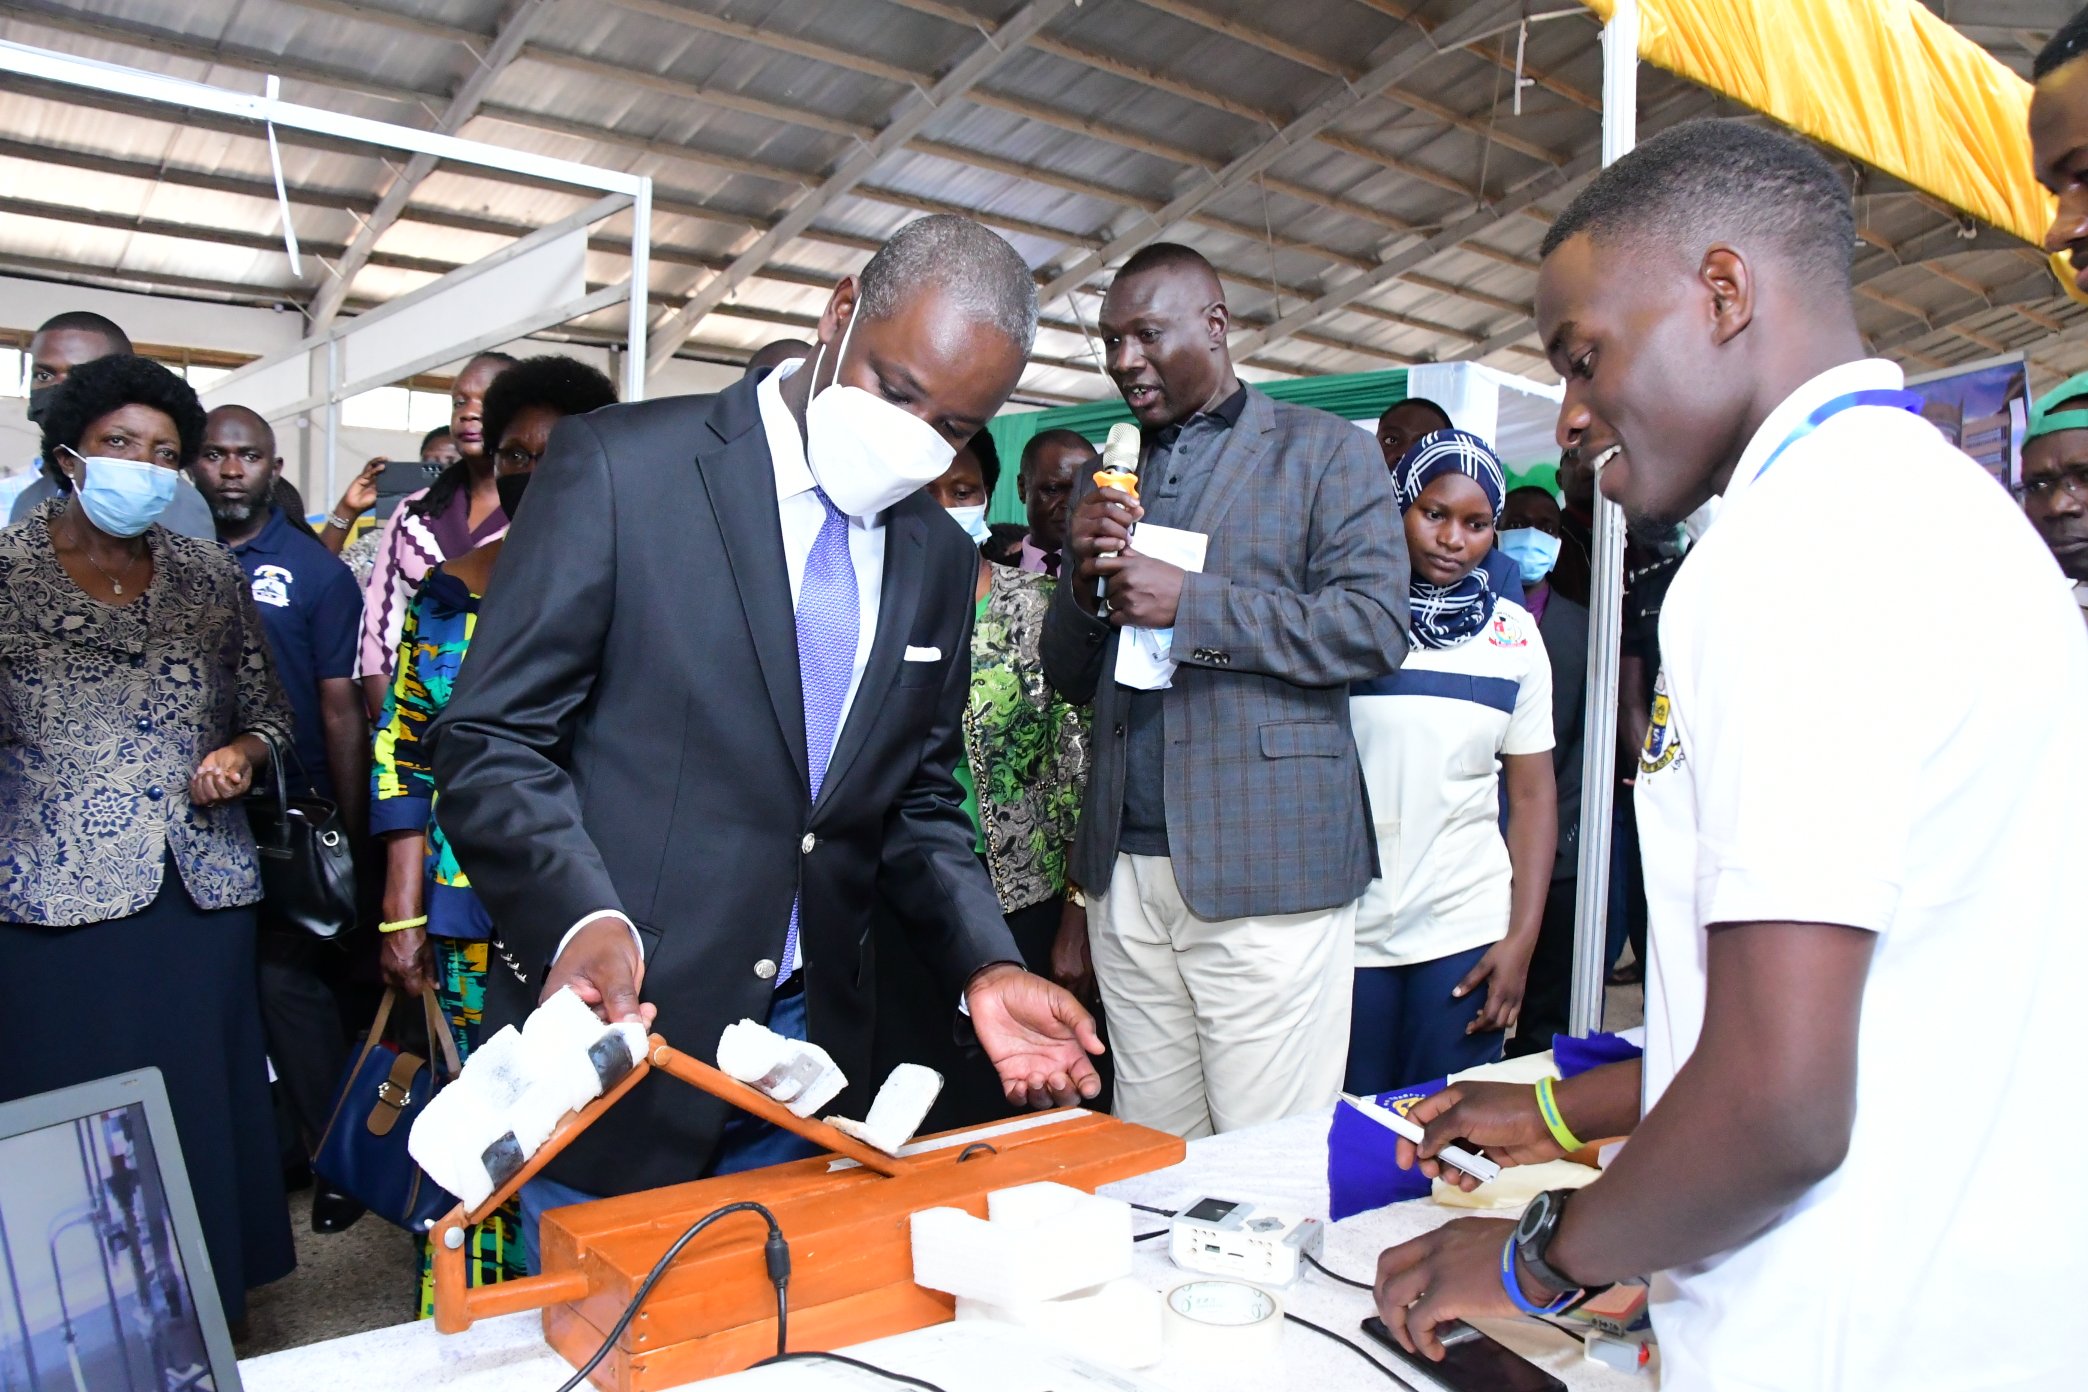 The Deputy Speaker of Parliament, Rt. Hon. Thomas Tayebwa inspects one of the innovations at the 13th Blended Higher Education Institutions Exhibition on 22nd September 2022. Courtesy Photo: Twitter/@Thomas_Tayebwa